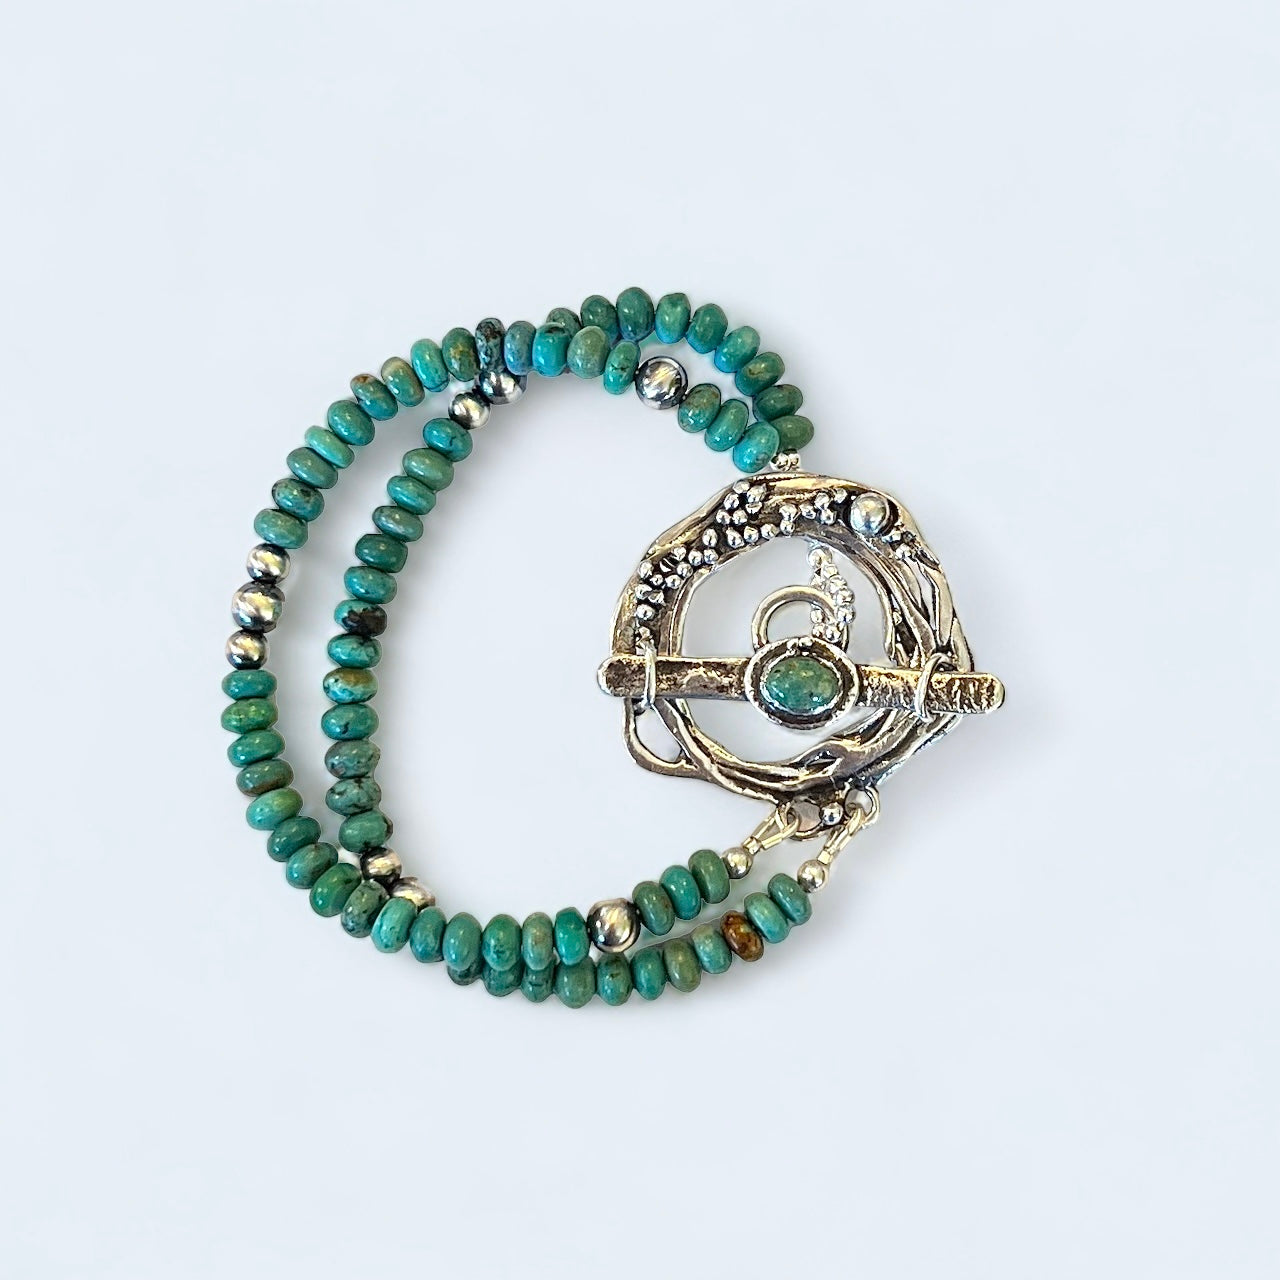 Emerald Valley and Hubei Turquoise Toggle Bracelet